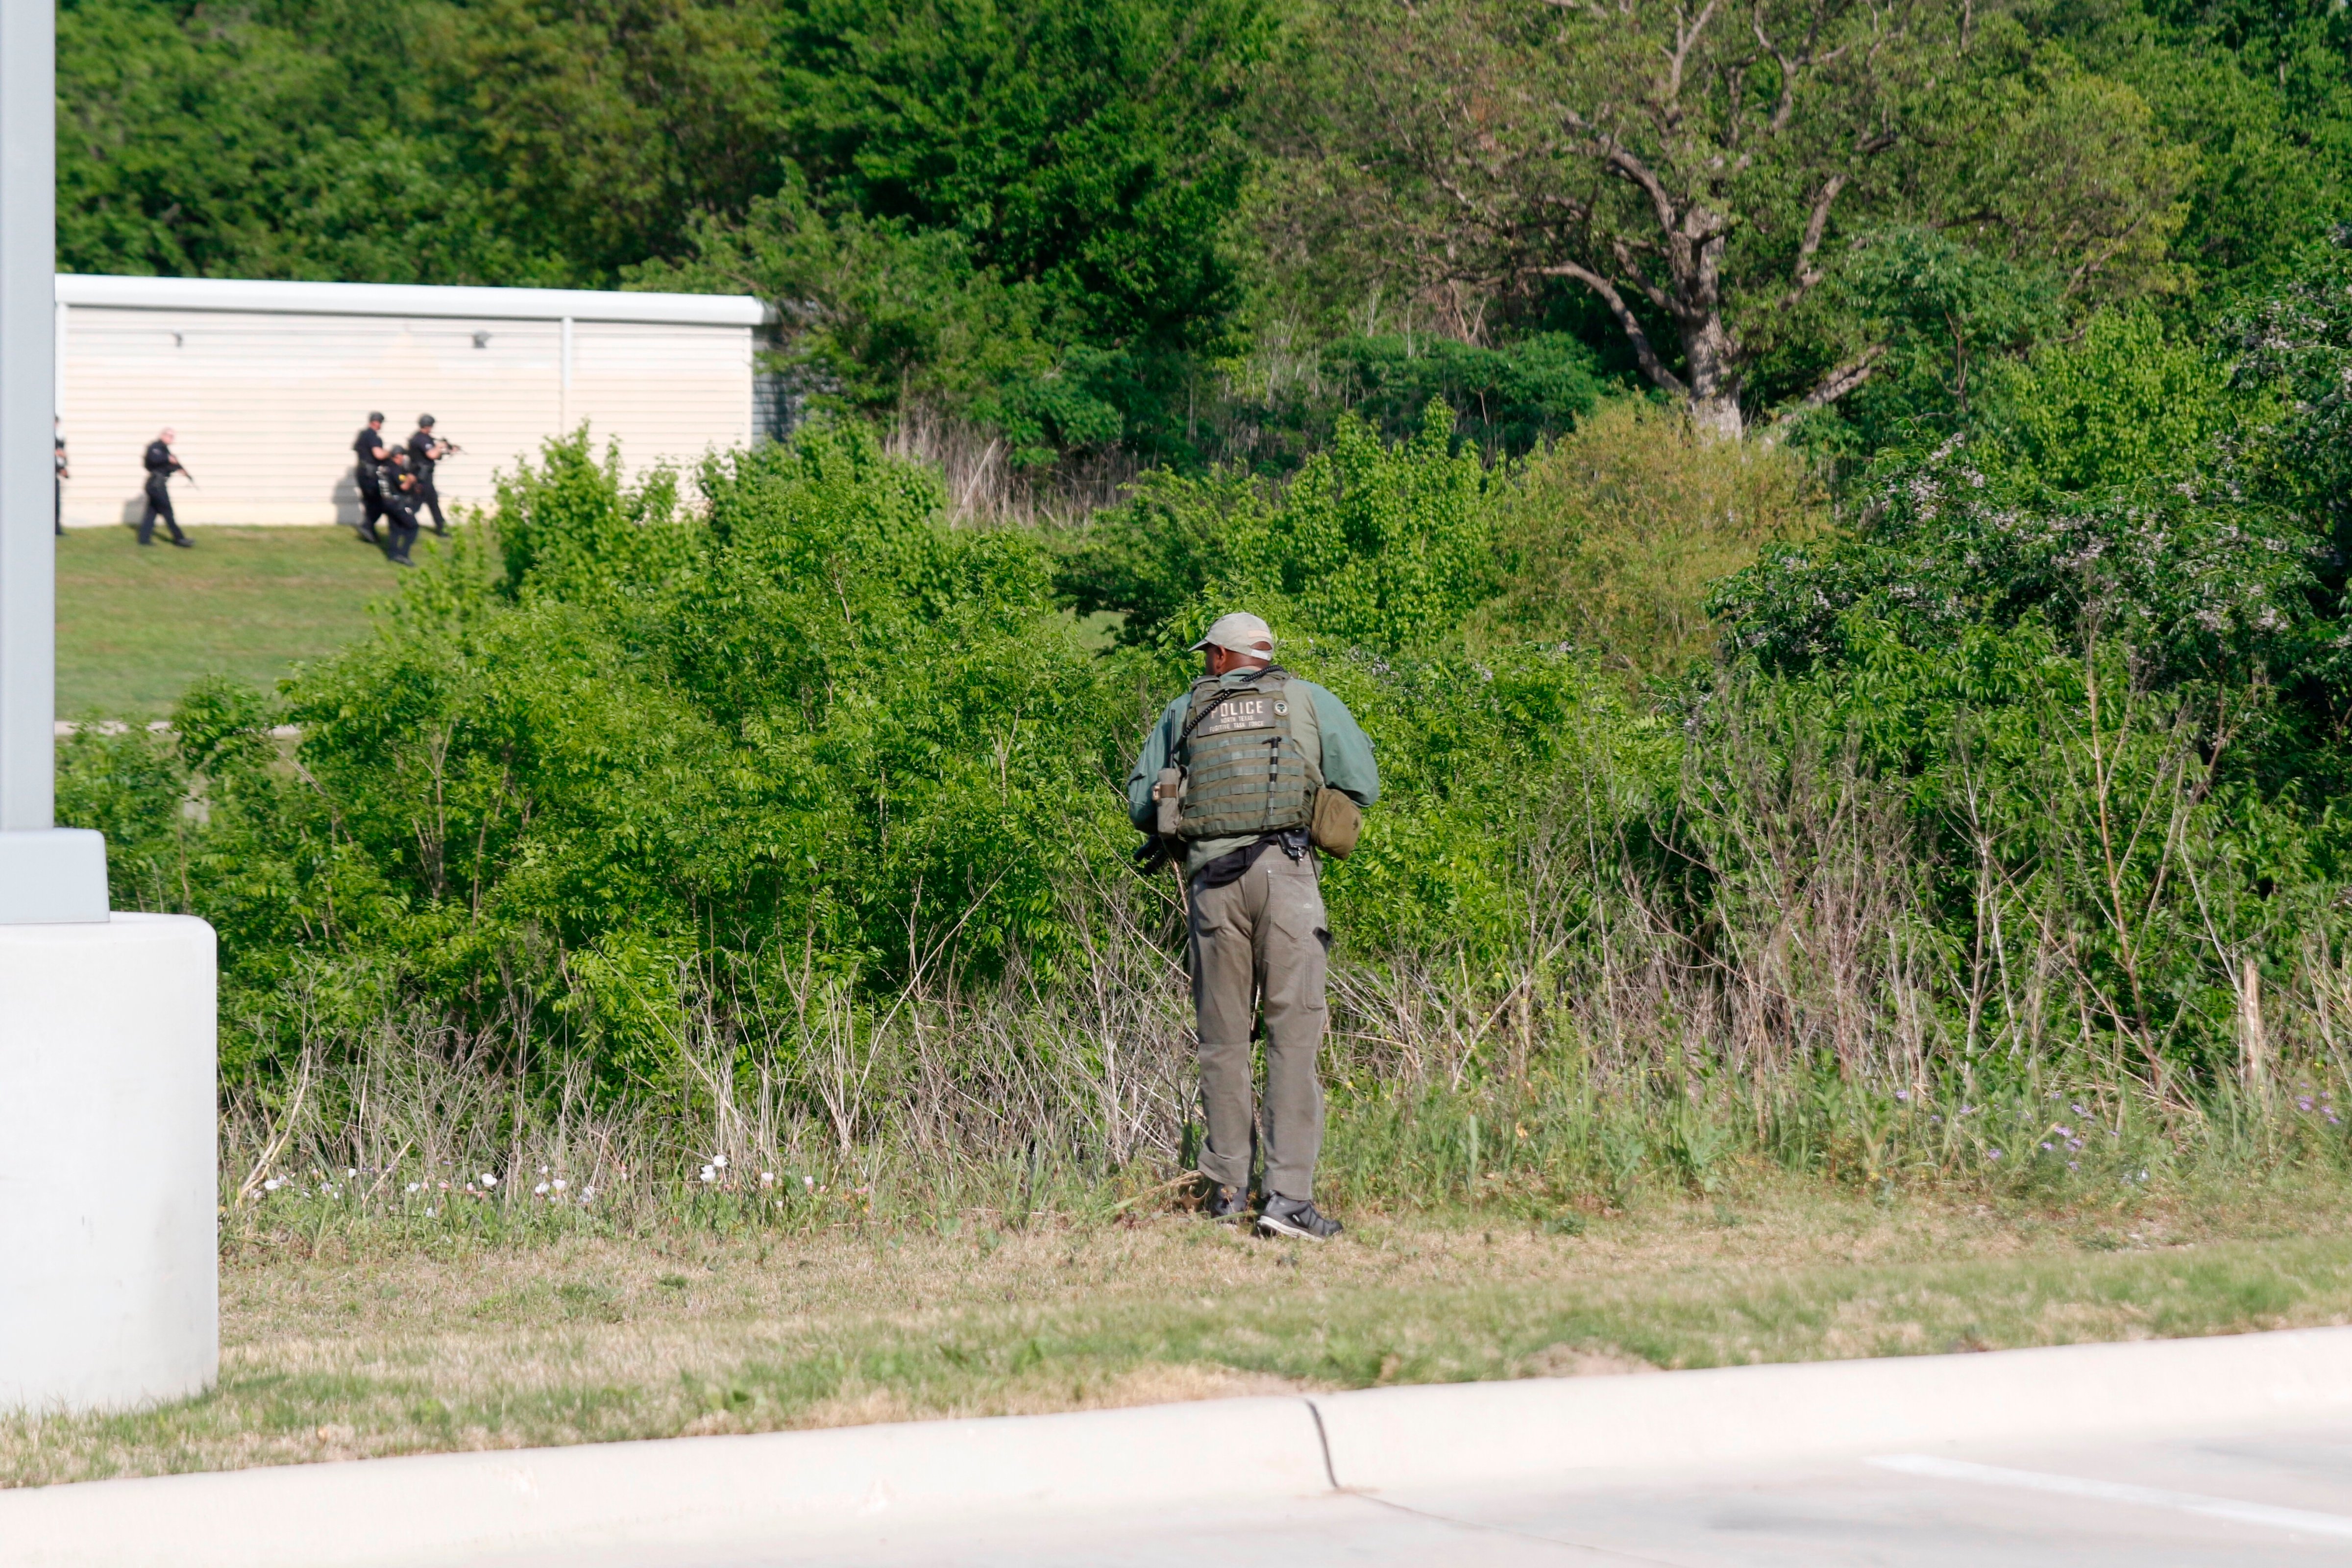 Dallas Police look for a suspect in the shooting of two police officers and a civilian Tuesday, April, 24,2018. Police are near ExtraSpace Storage, south of The Home Depot. Officer in the foreground is behind the Key-Whitman Eye Center on Central Expressway. (Ron Baselice/The Dallas Morning News via AP) (Ron Baselice&mdash;AP)